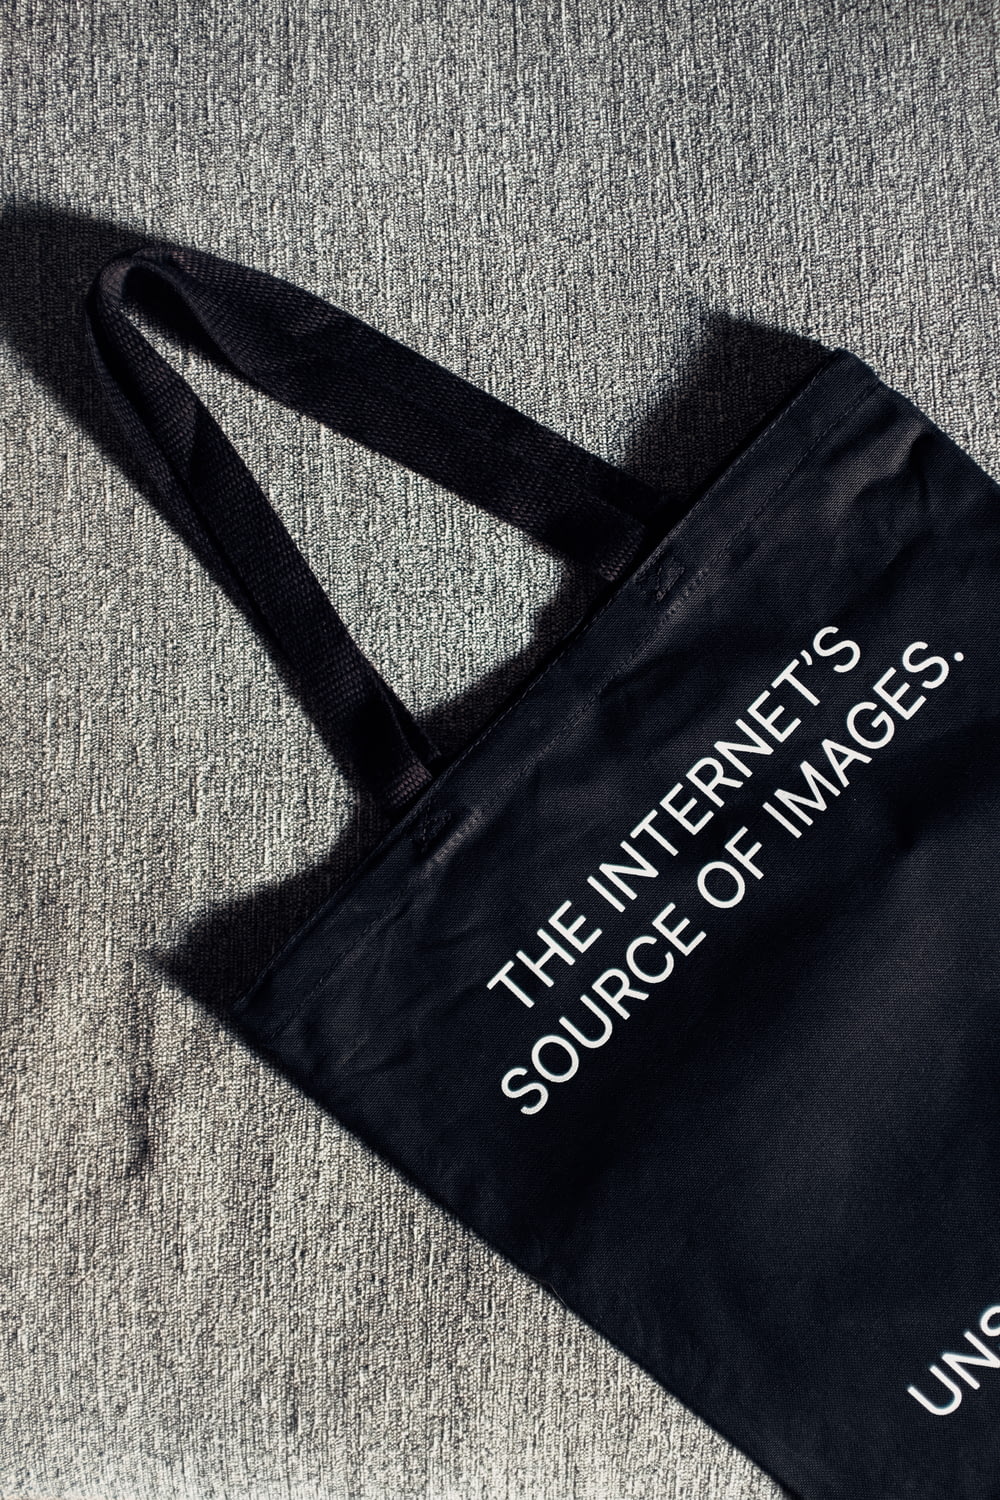 a black bag with the words the internet is source of images printed on it